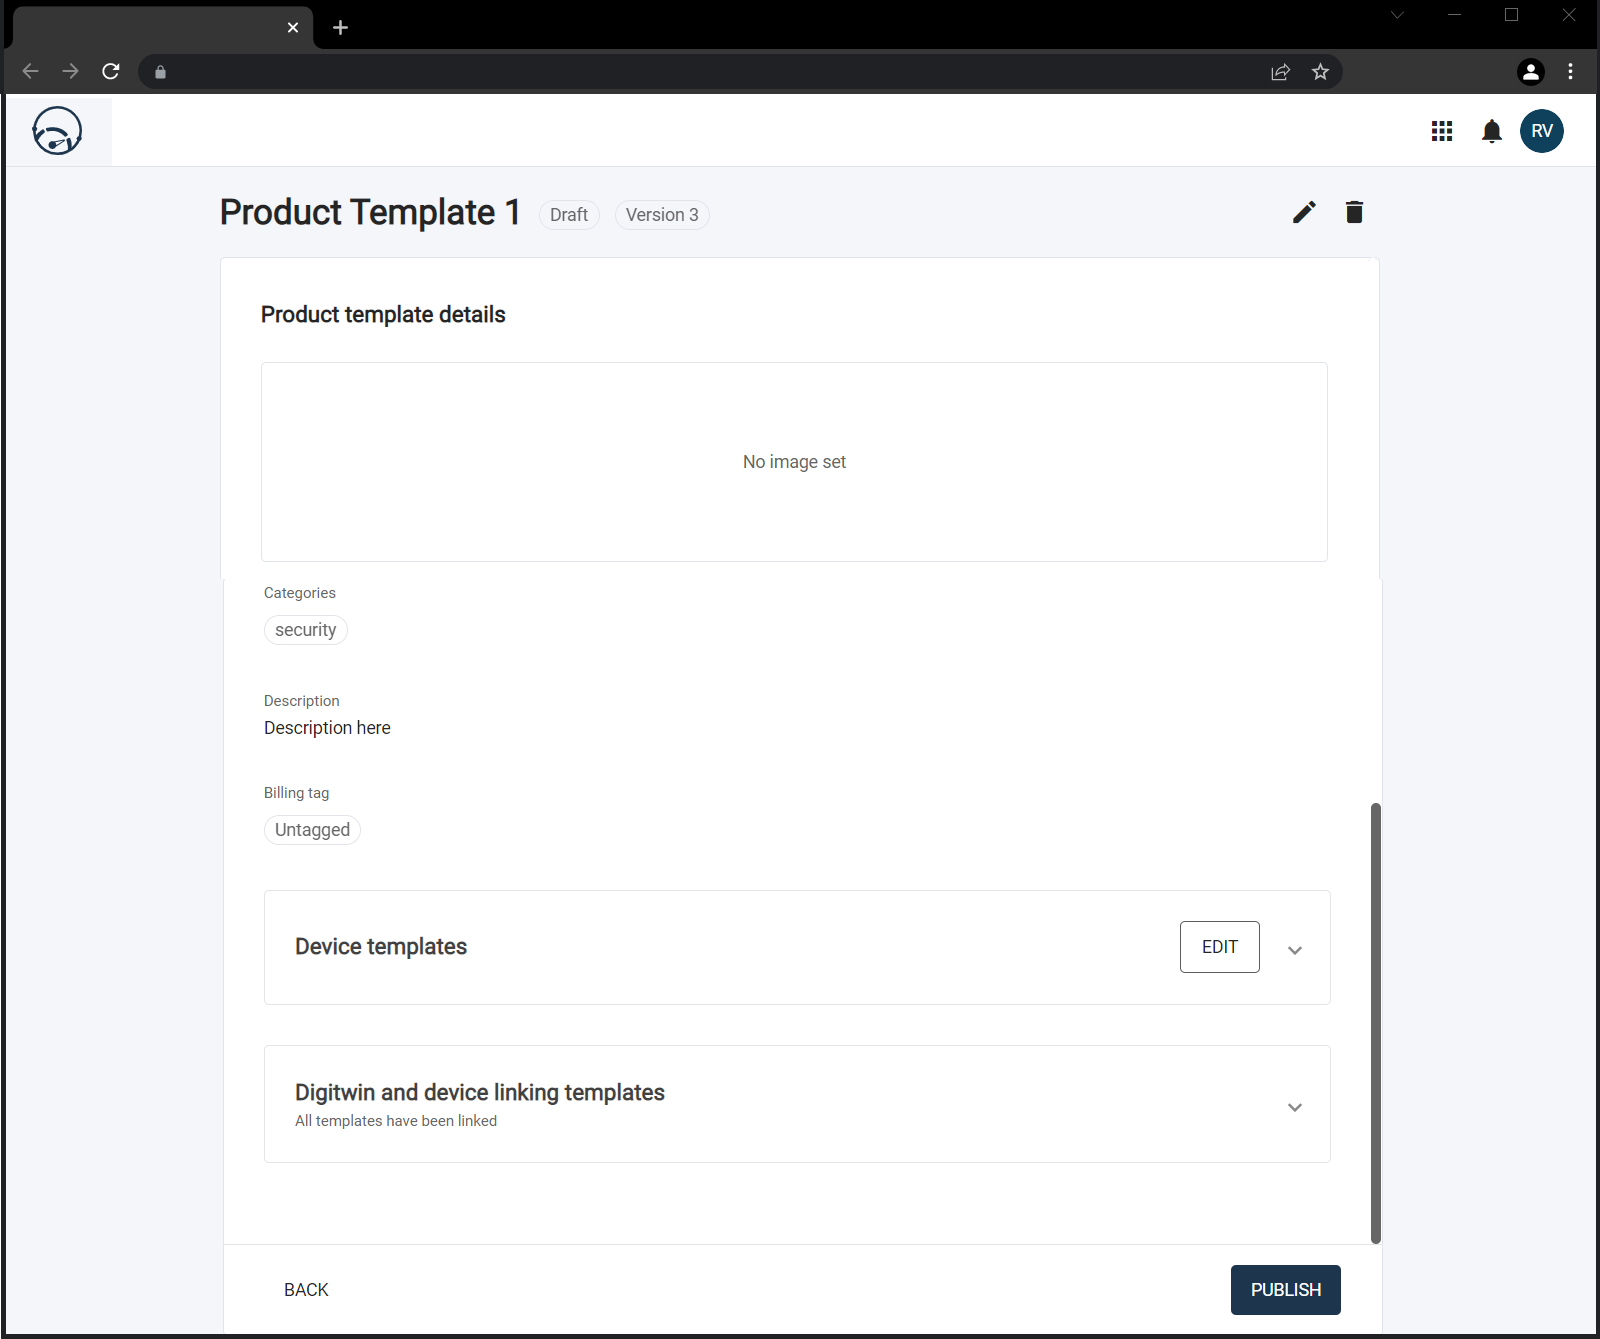 Product template details